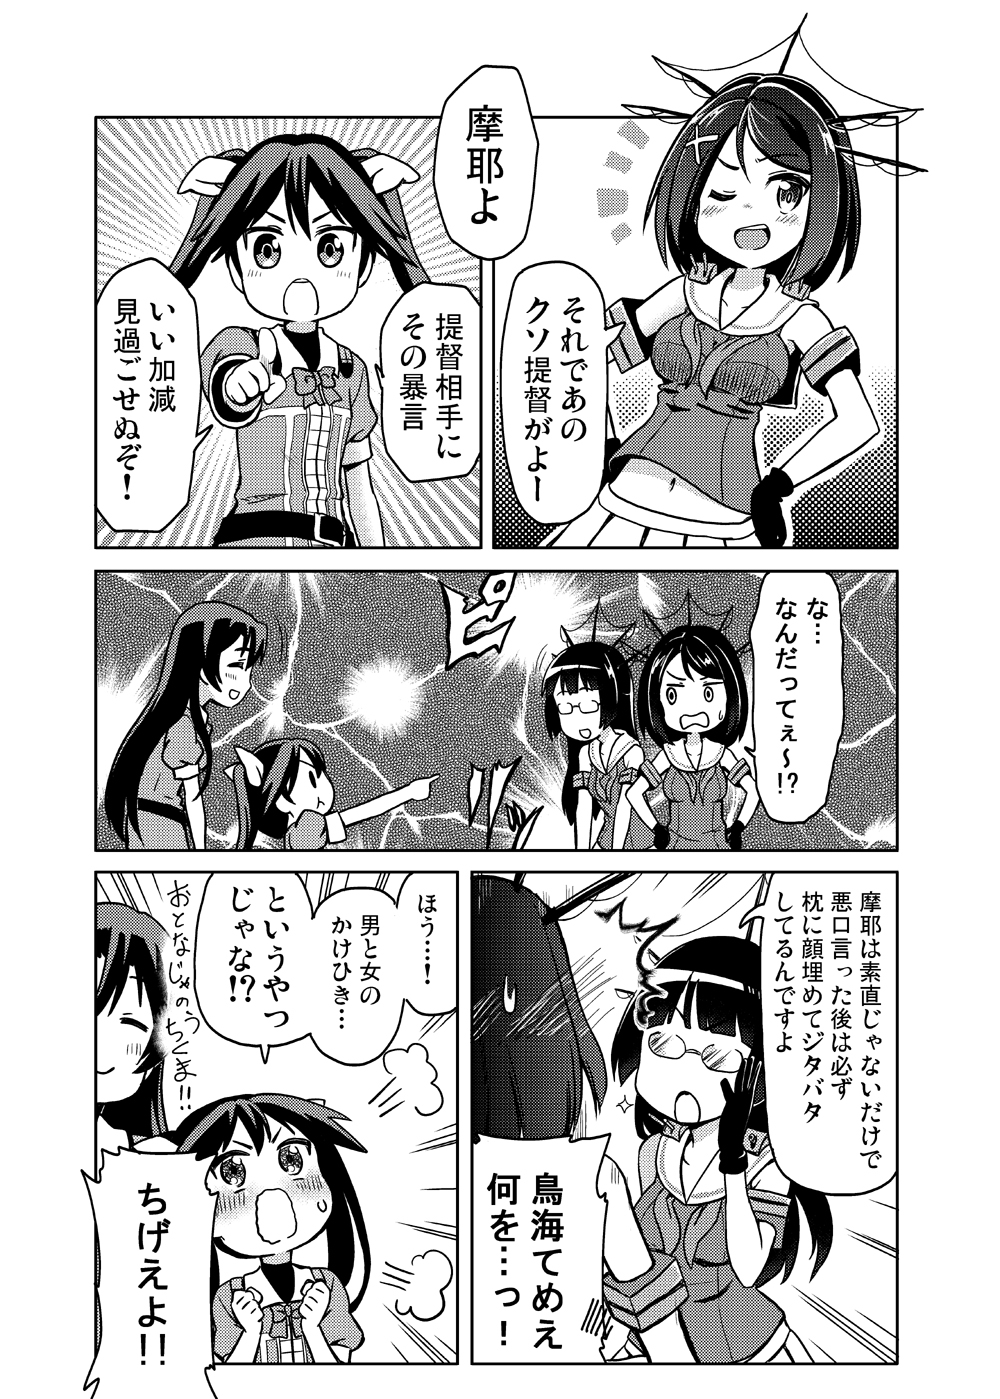 4girls adjusting_glasses chikuma_(kantai_collection) choukai_(kantai_collection) comic glasses hair_ornament hair_ribbon highres kantai_collection long_hair magokorokurage maya_(kantai_collection) monochrome multiple_girls one_eye_closed ribbon school_uniform short_hair tone_(kantai_collection) translation_request twintails wink